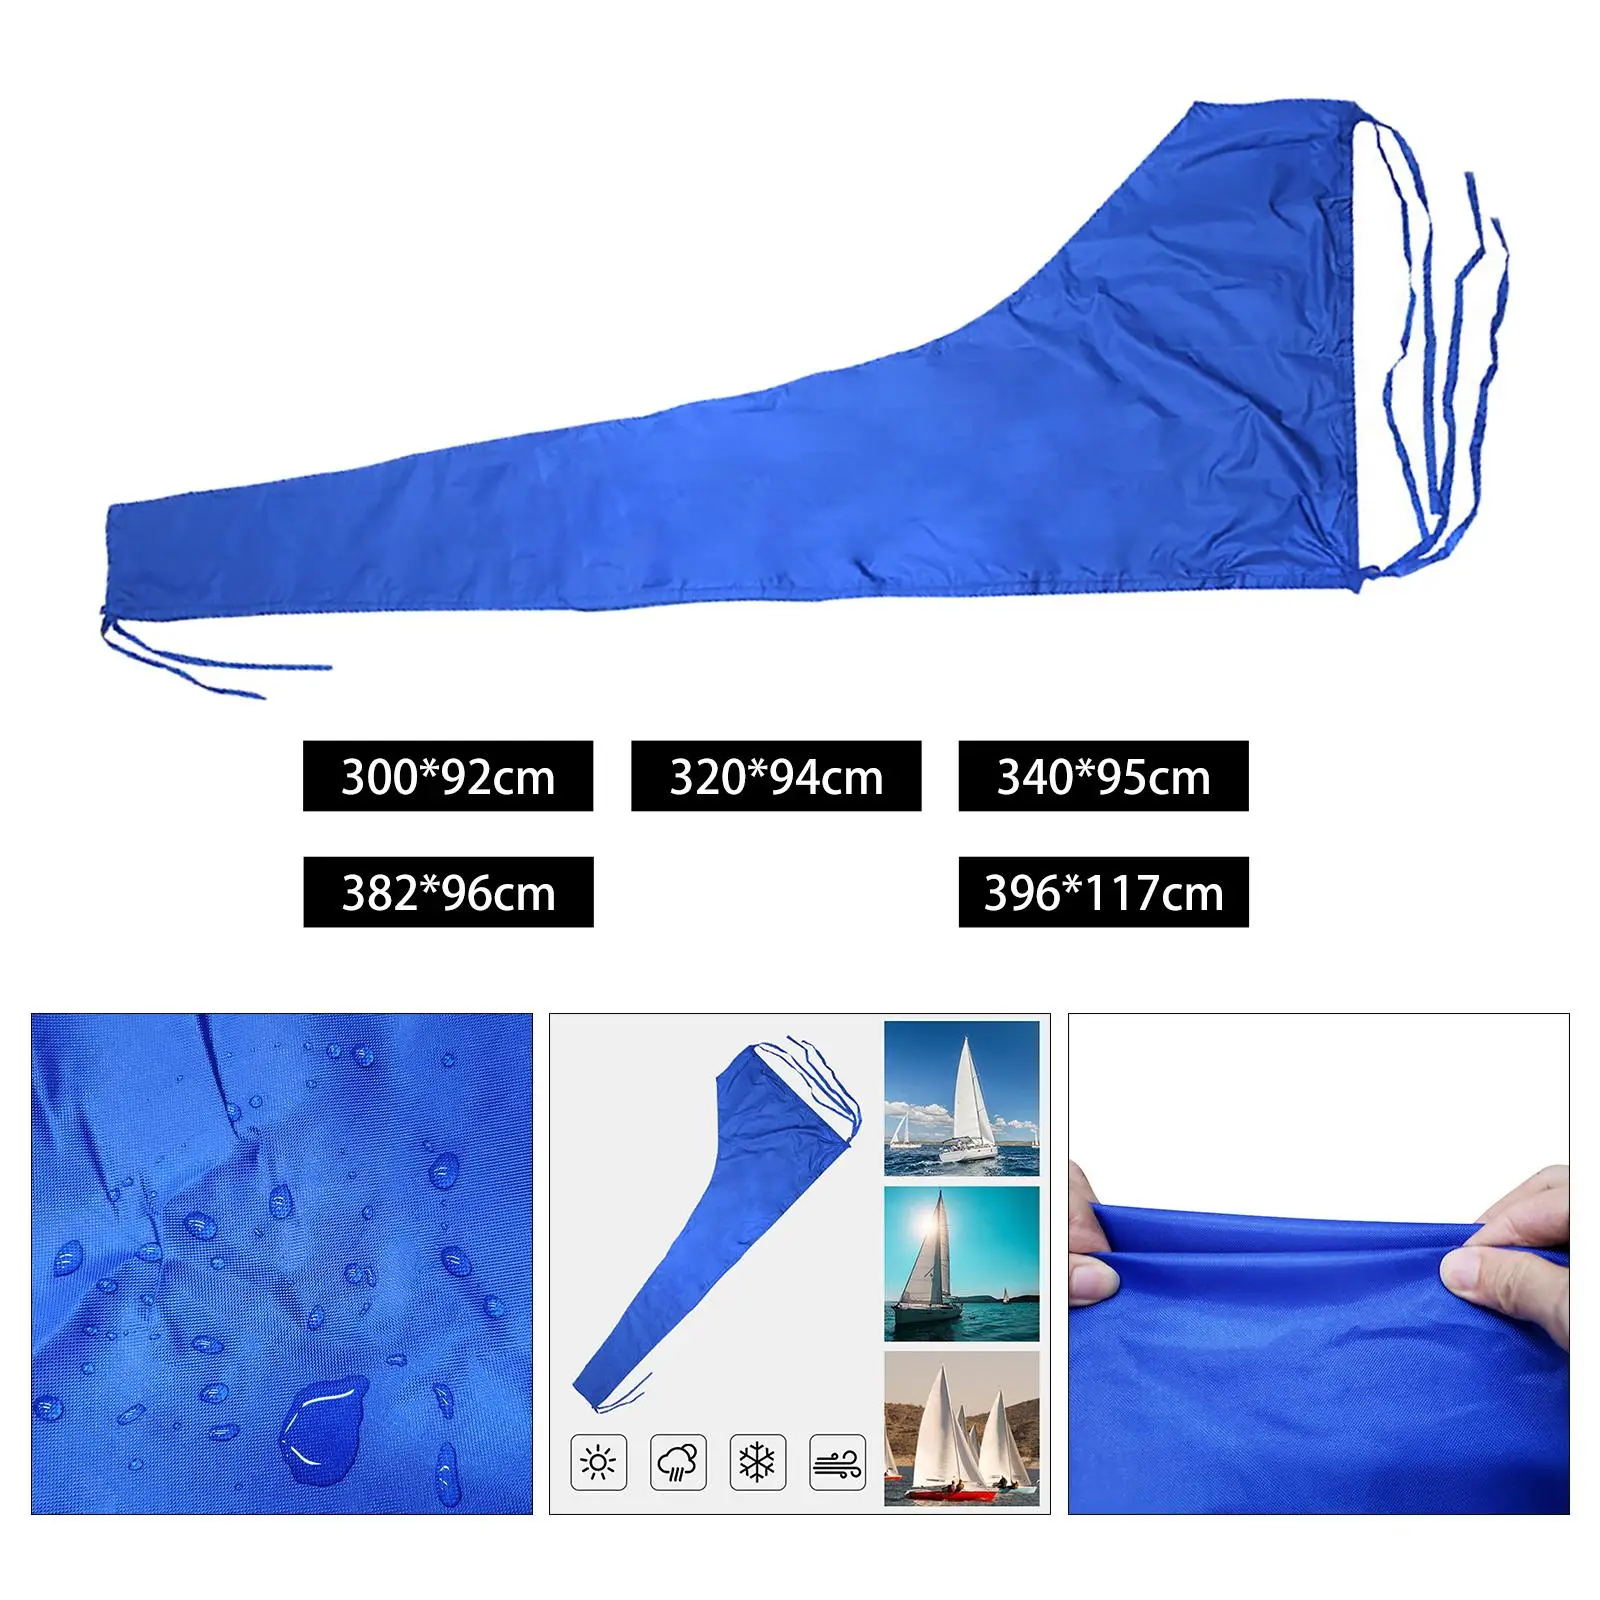 Waterproof Mainsail Cover Adjustable Strap Thickened Boat Accessories